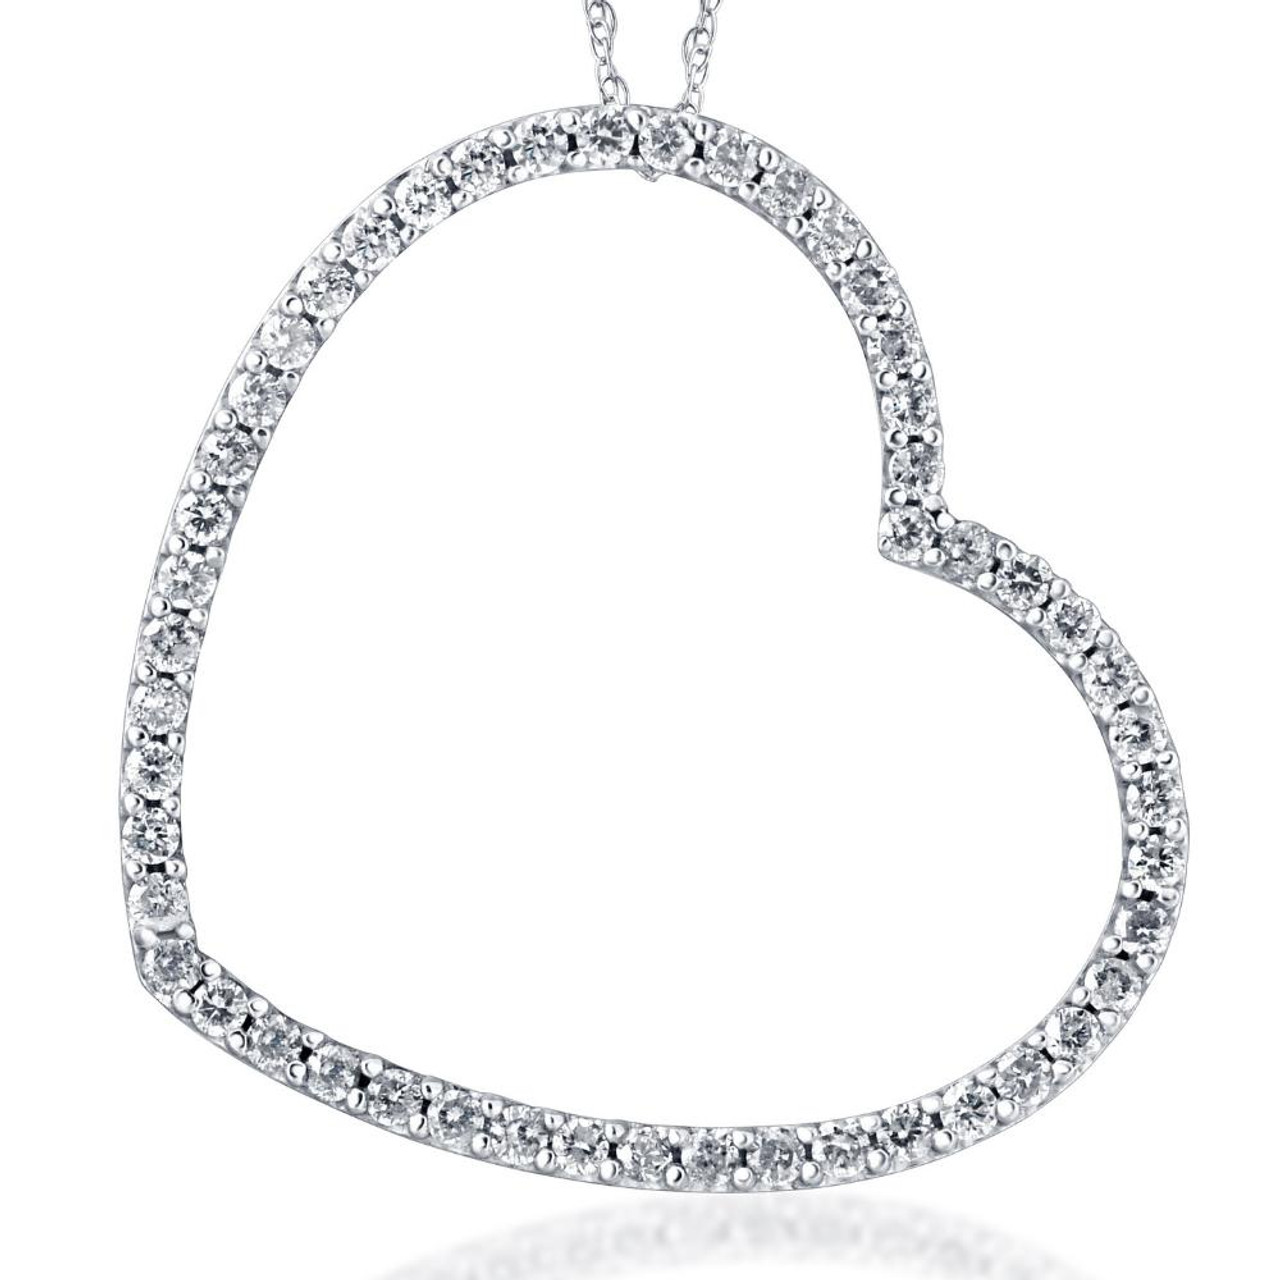 Diamond Tilted Heart Necklace, Silver or White Gold